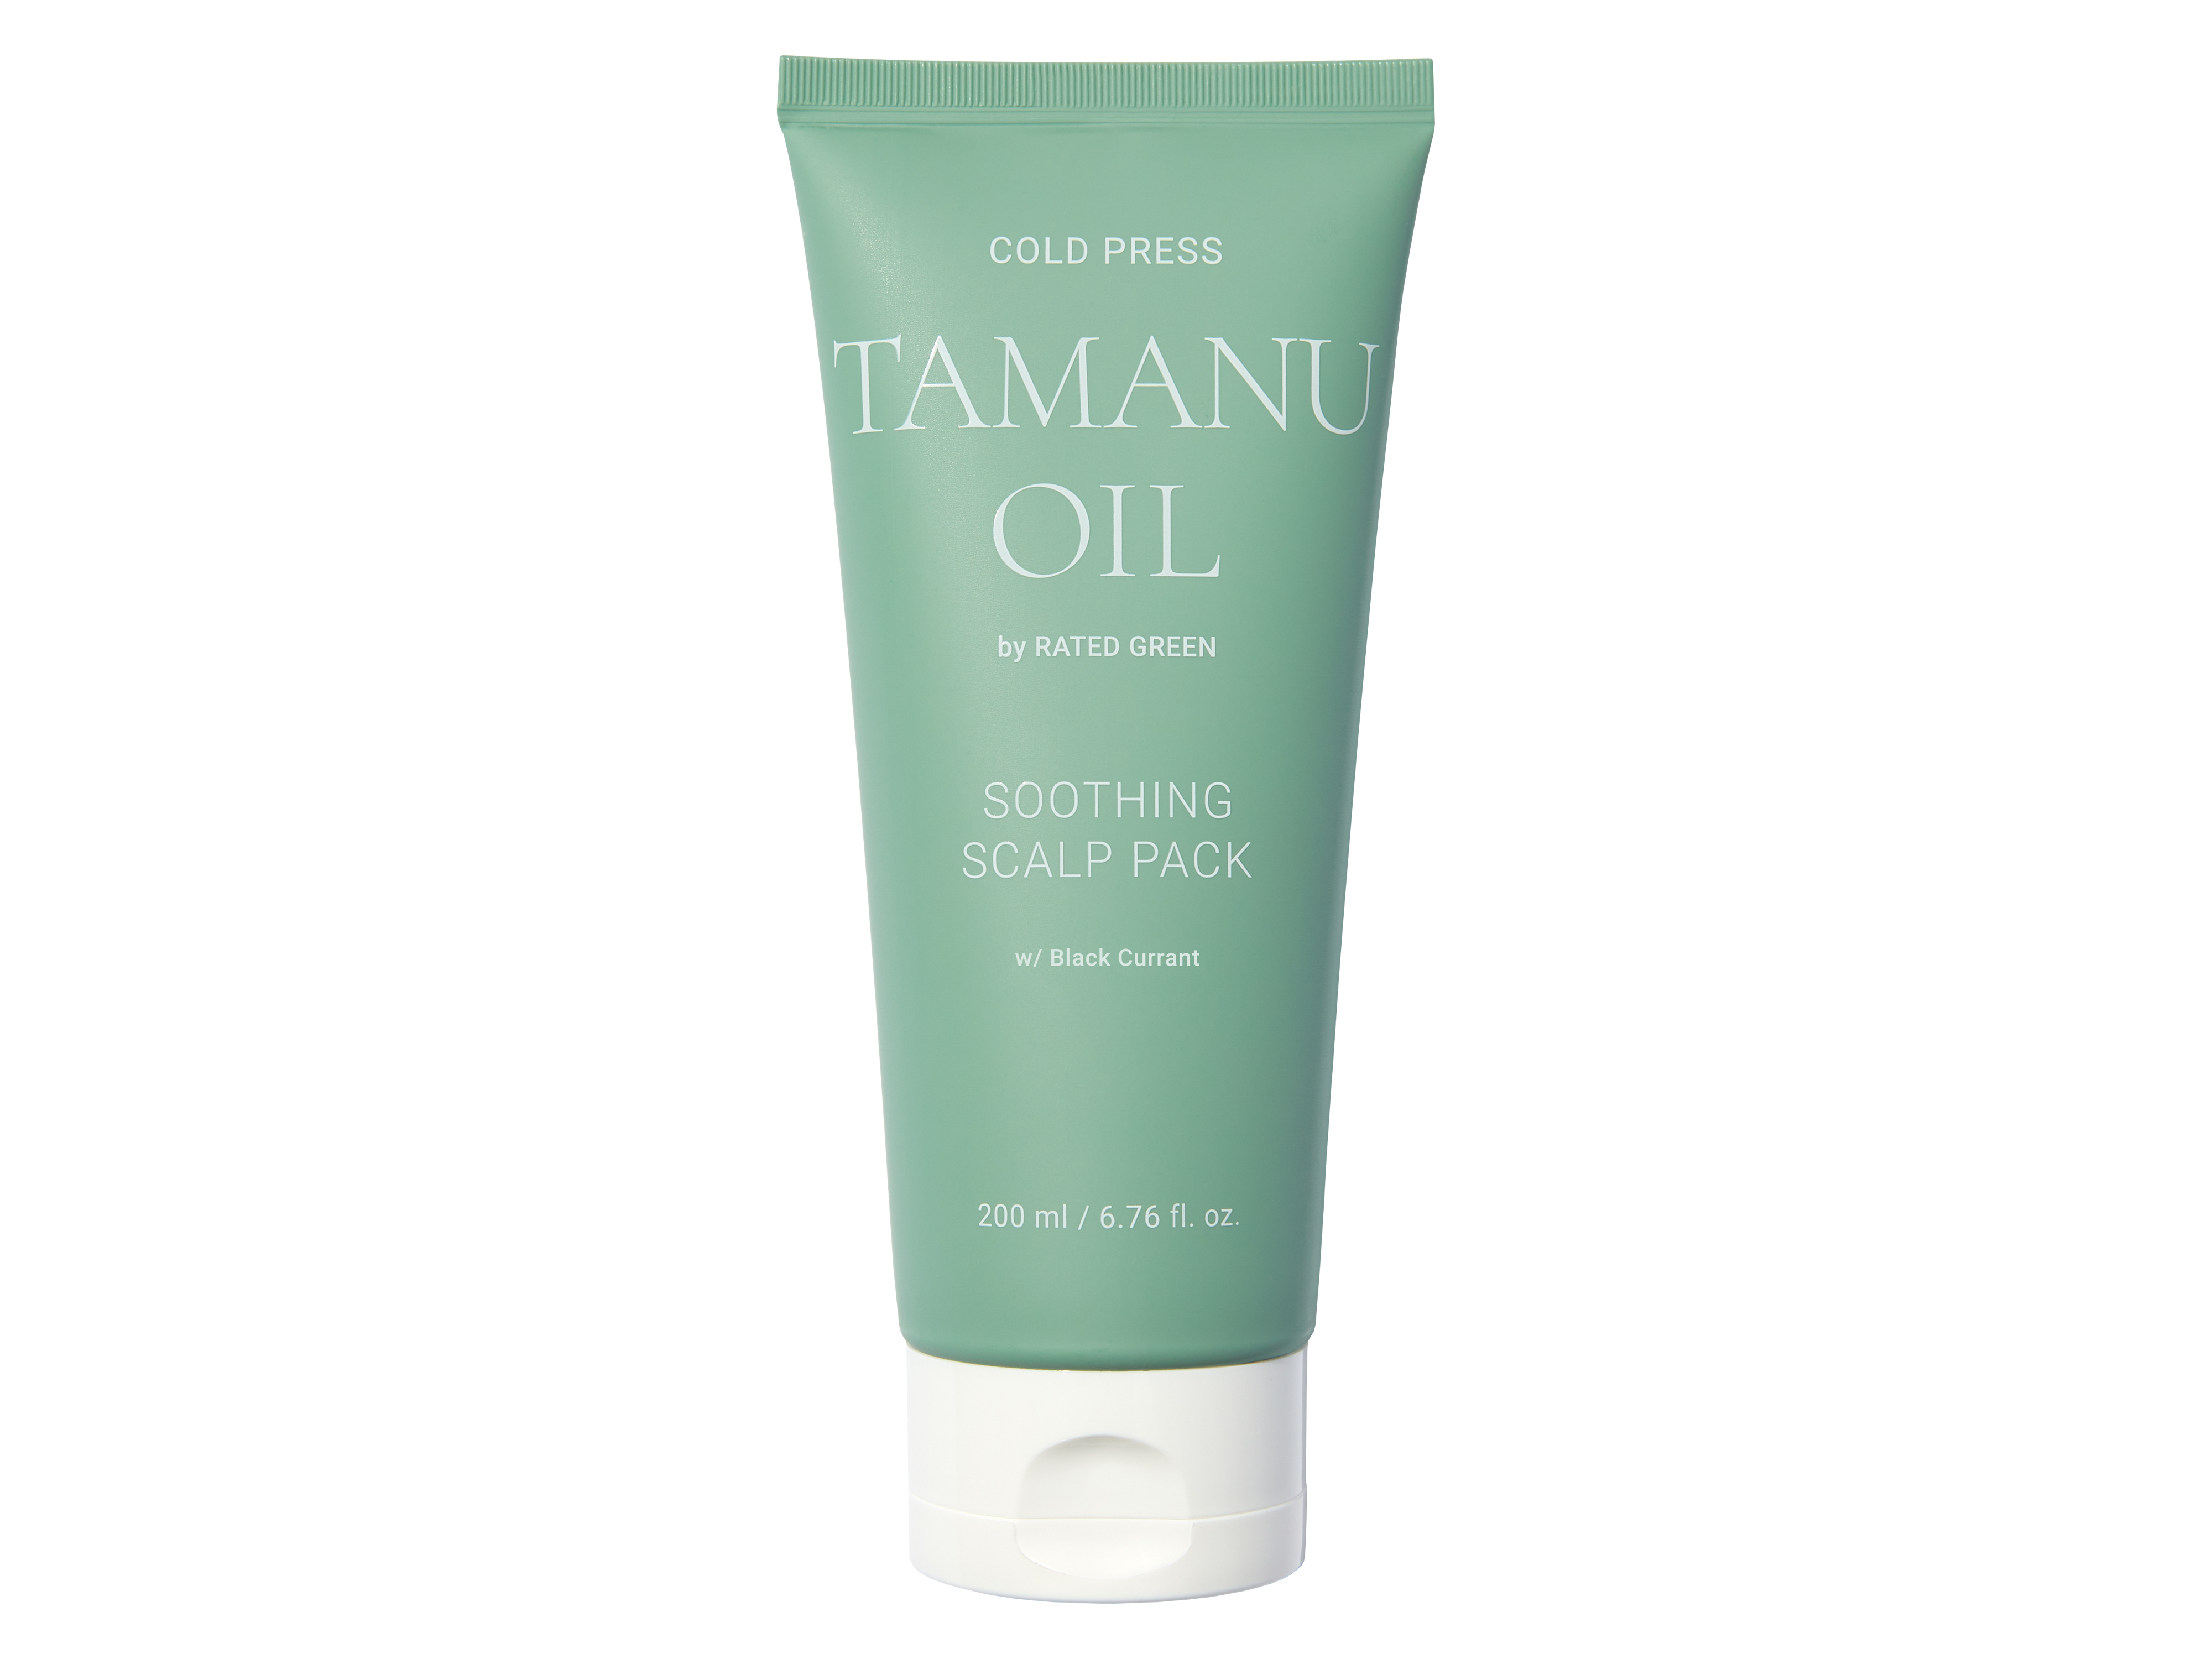 Rated Green Cold Press Tamanu Oil Soothing Scalp Pack, 200 ml